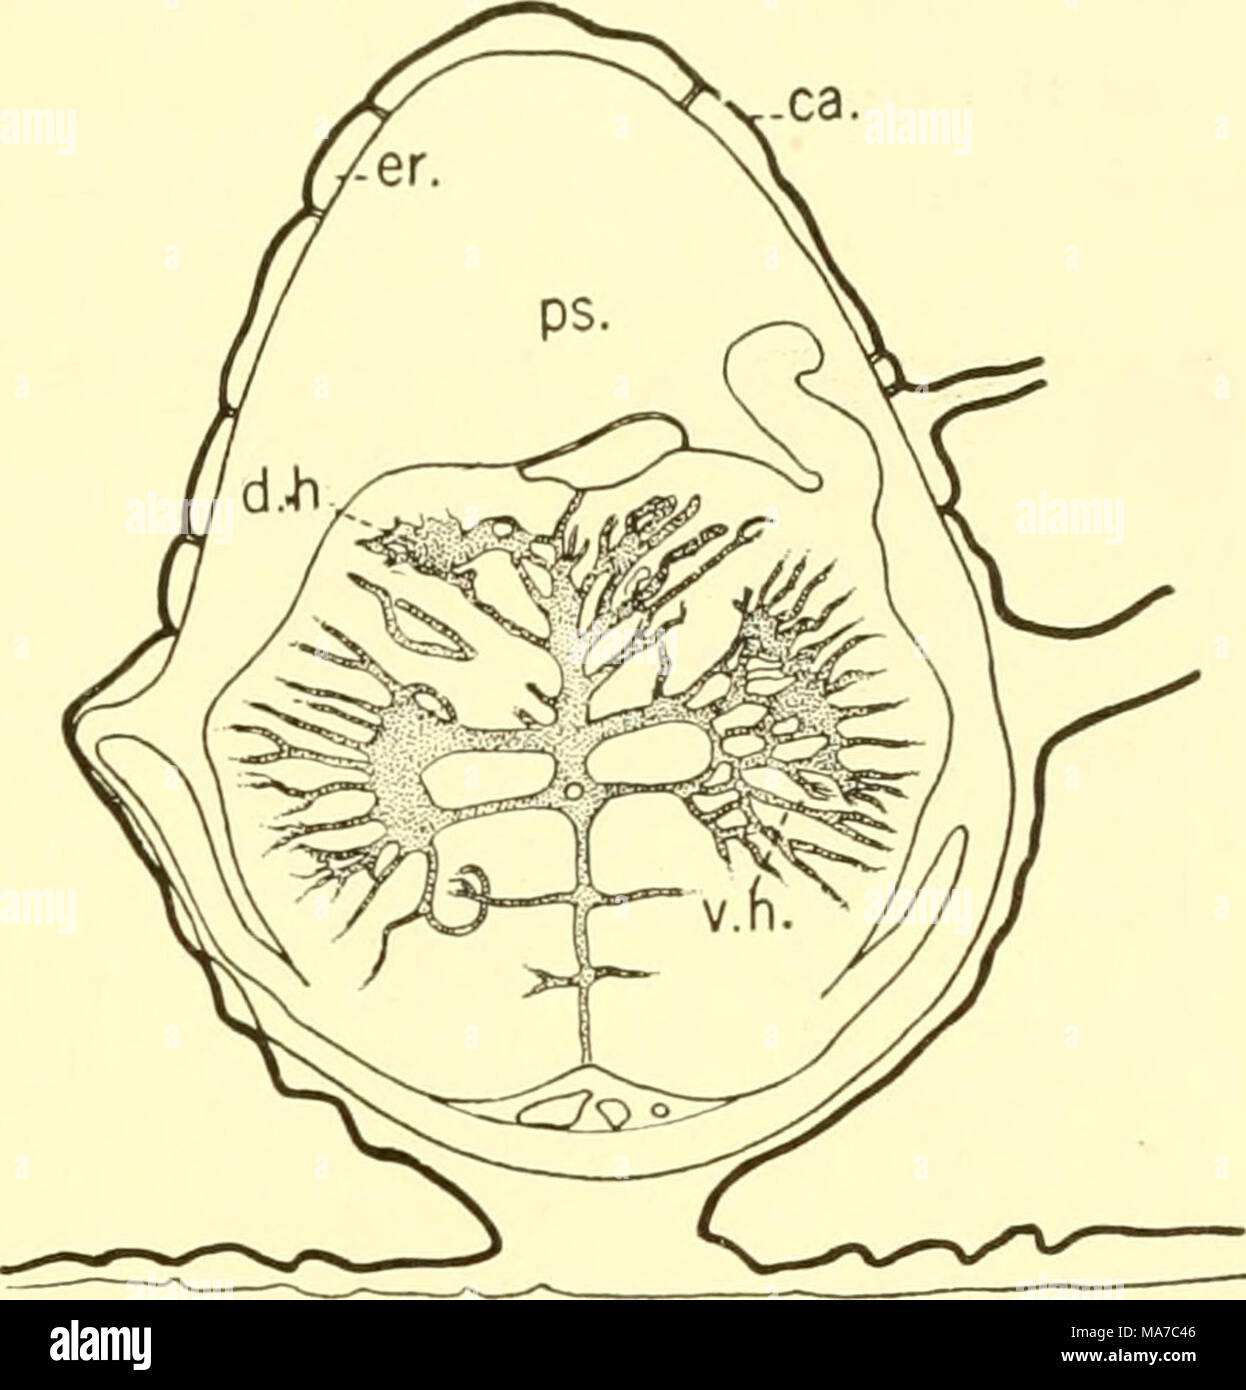 . The elasmobranch fishes . A B Fig. 217. Transverse sections of the spinal cord. (From Sterzi.) A. Acanthias vulgaris. B. Baja clavata. ca., calcification; d.li., dorsal horn; d.r., dorsal root; er., endorachis; nc, neurocoele; pm., paracentral mass; ps., perimeningeal space; v.h., ventral horn. sixth nerve and the grey matter of the formatio-reticularis {f.r., fig. 216) is occupied in the cord by the ventral horn {v.h., fig. 217); while the general cutaneous nucleus of the medulla (g.c.n.) gives place to the dorsal horn of the cord (d.h., fig. 217); and the lobes of the vagus and the viscero Stock Photo